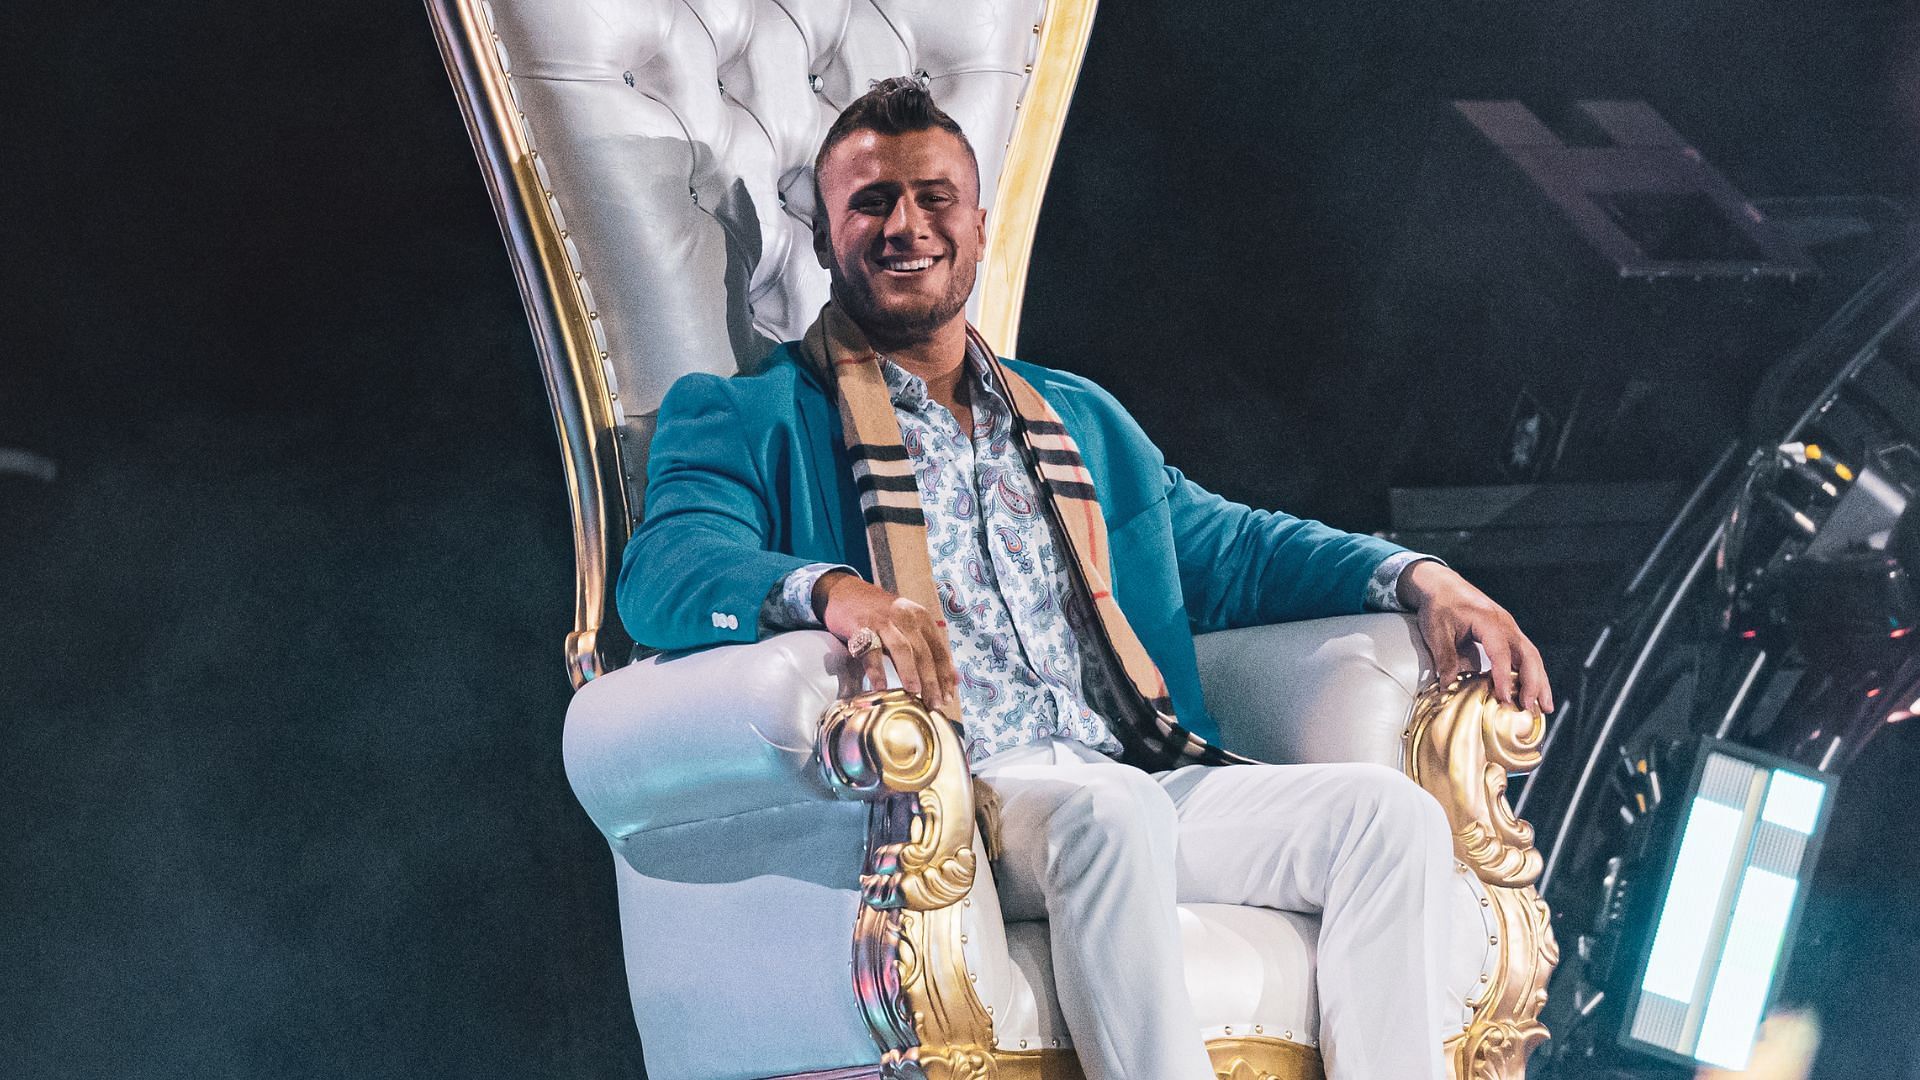 MJF making his entrance at an AEW event in 2022 (credit: Jay Lee Photography)